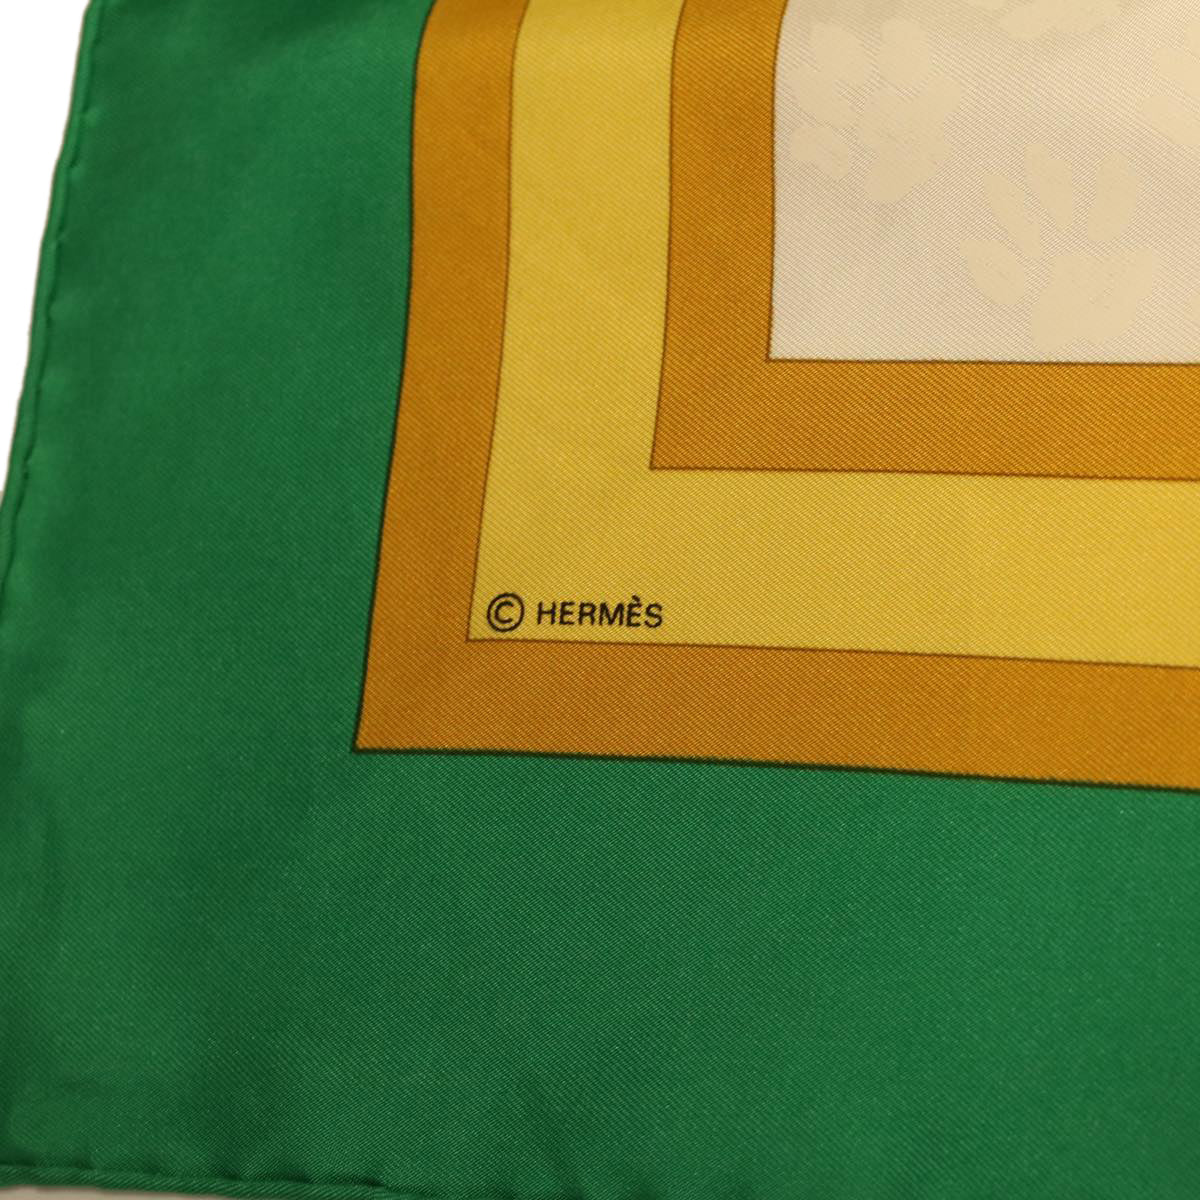 HERMES Carre 90 Les Chats Scarf Green White yellow Auth am3480